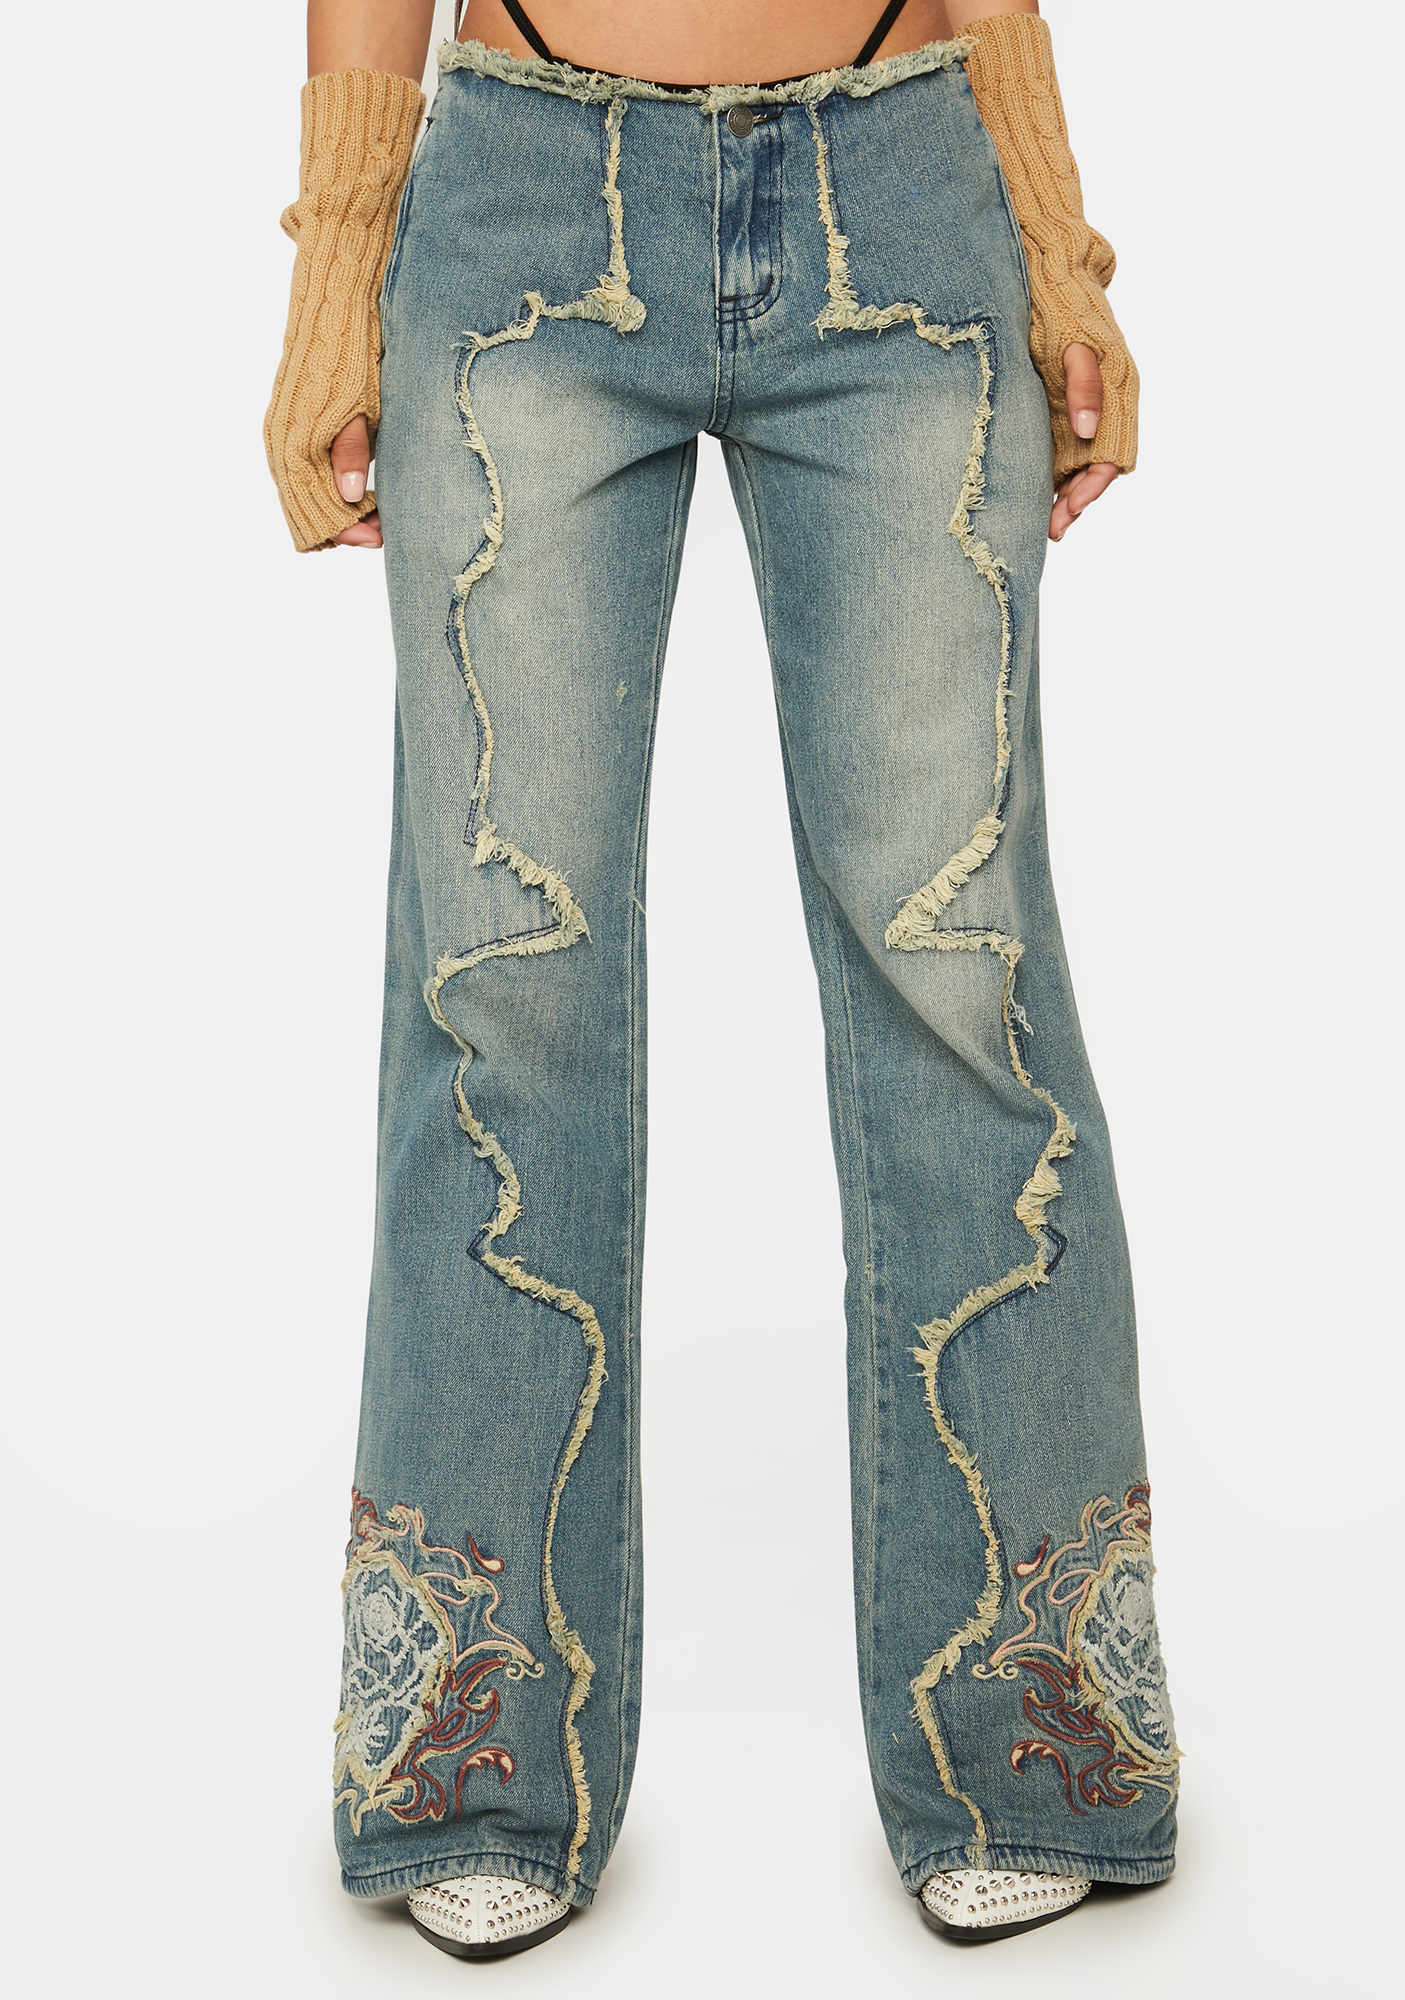 Jaded London Floral Embroidered Low Rise Denim Jeans | Dolls Kill